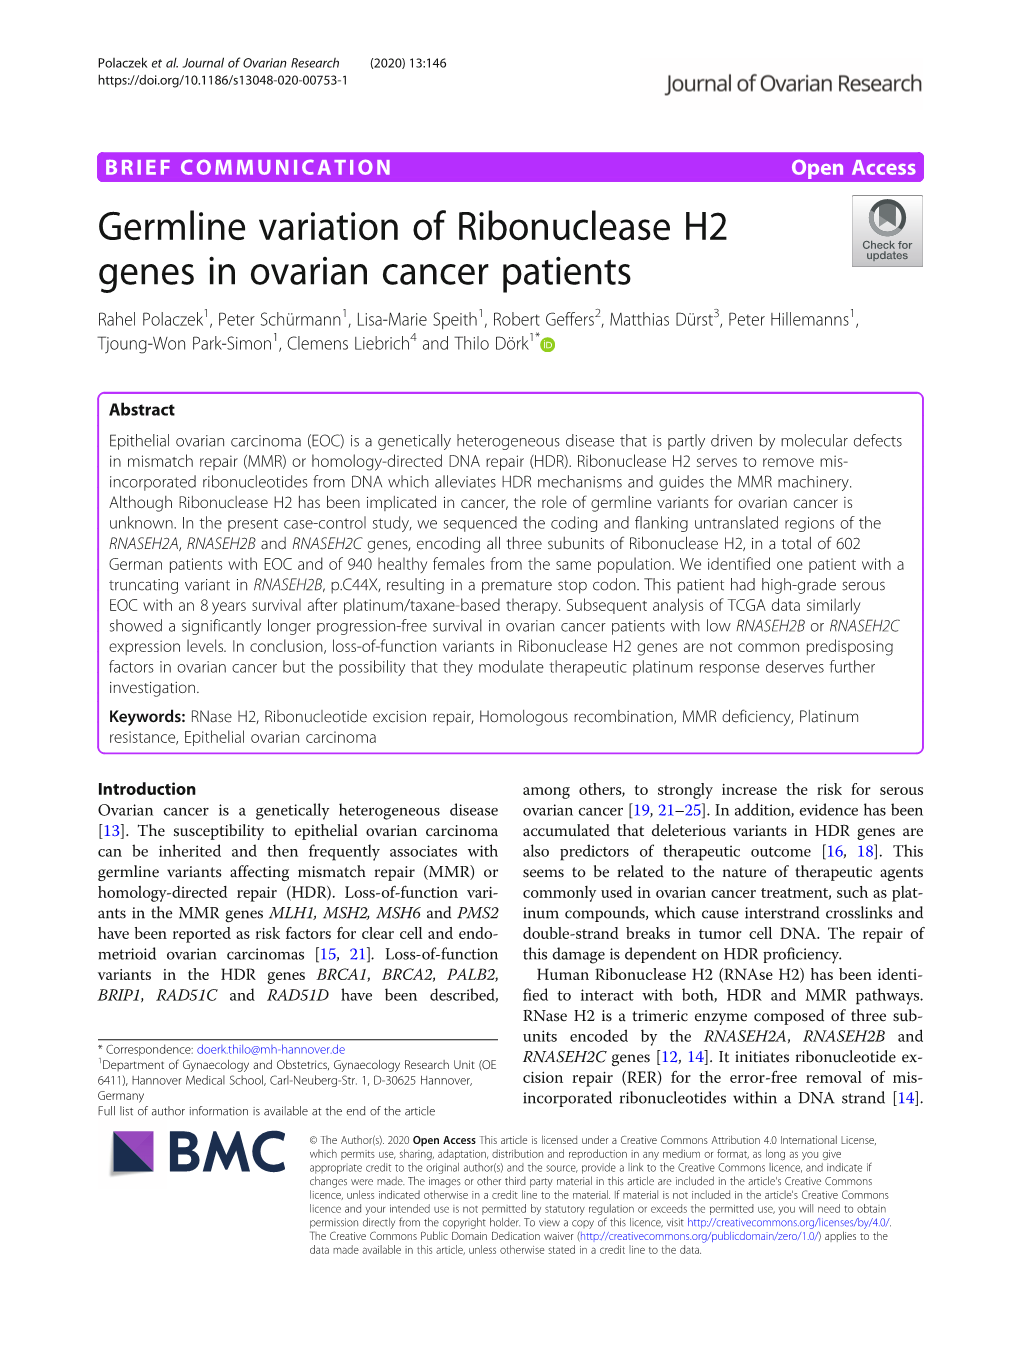 Germline Variation of Ribonuclease H2 Genes in Ovarian Cancer Patients